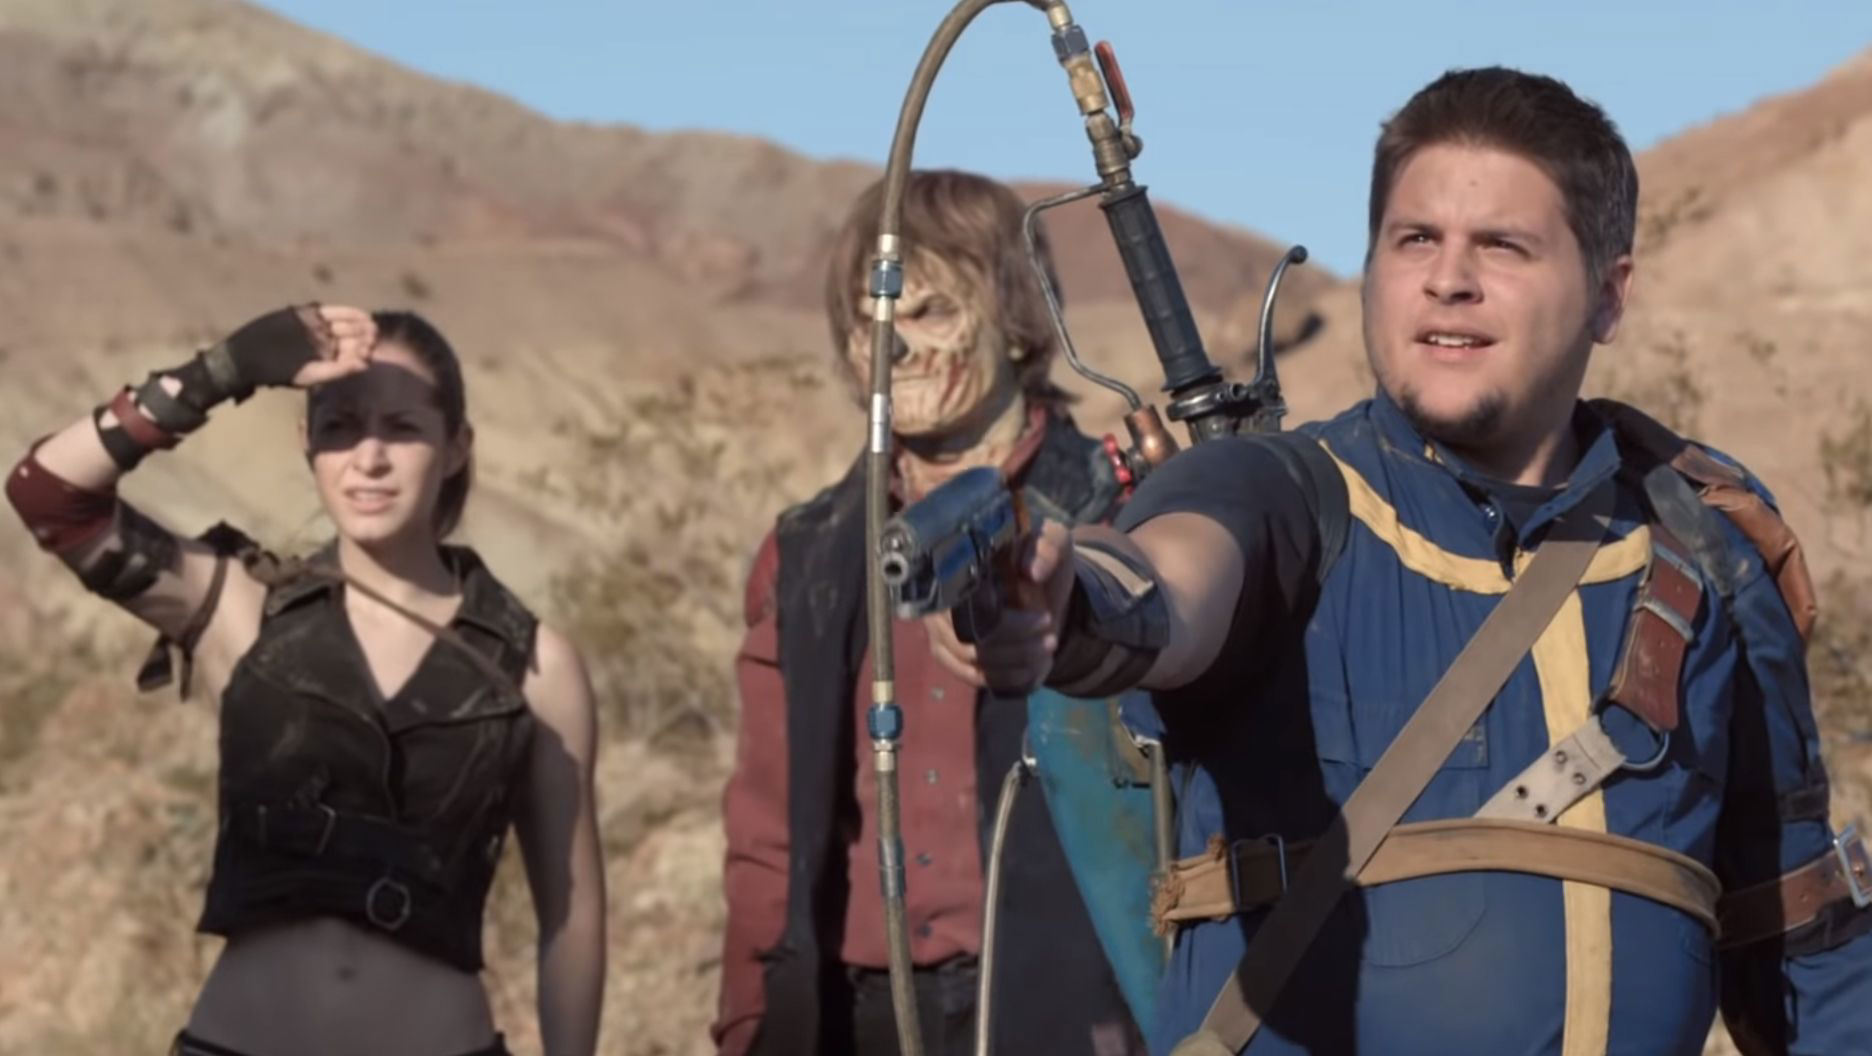 Reminder There's already a Fallout TV series you can watch right now